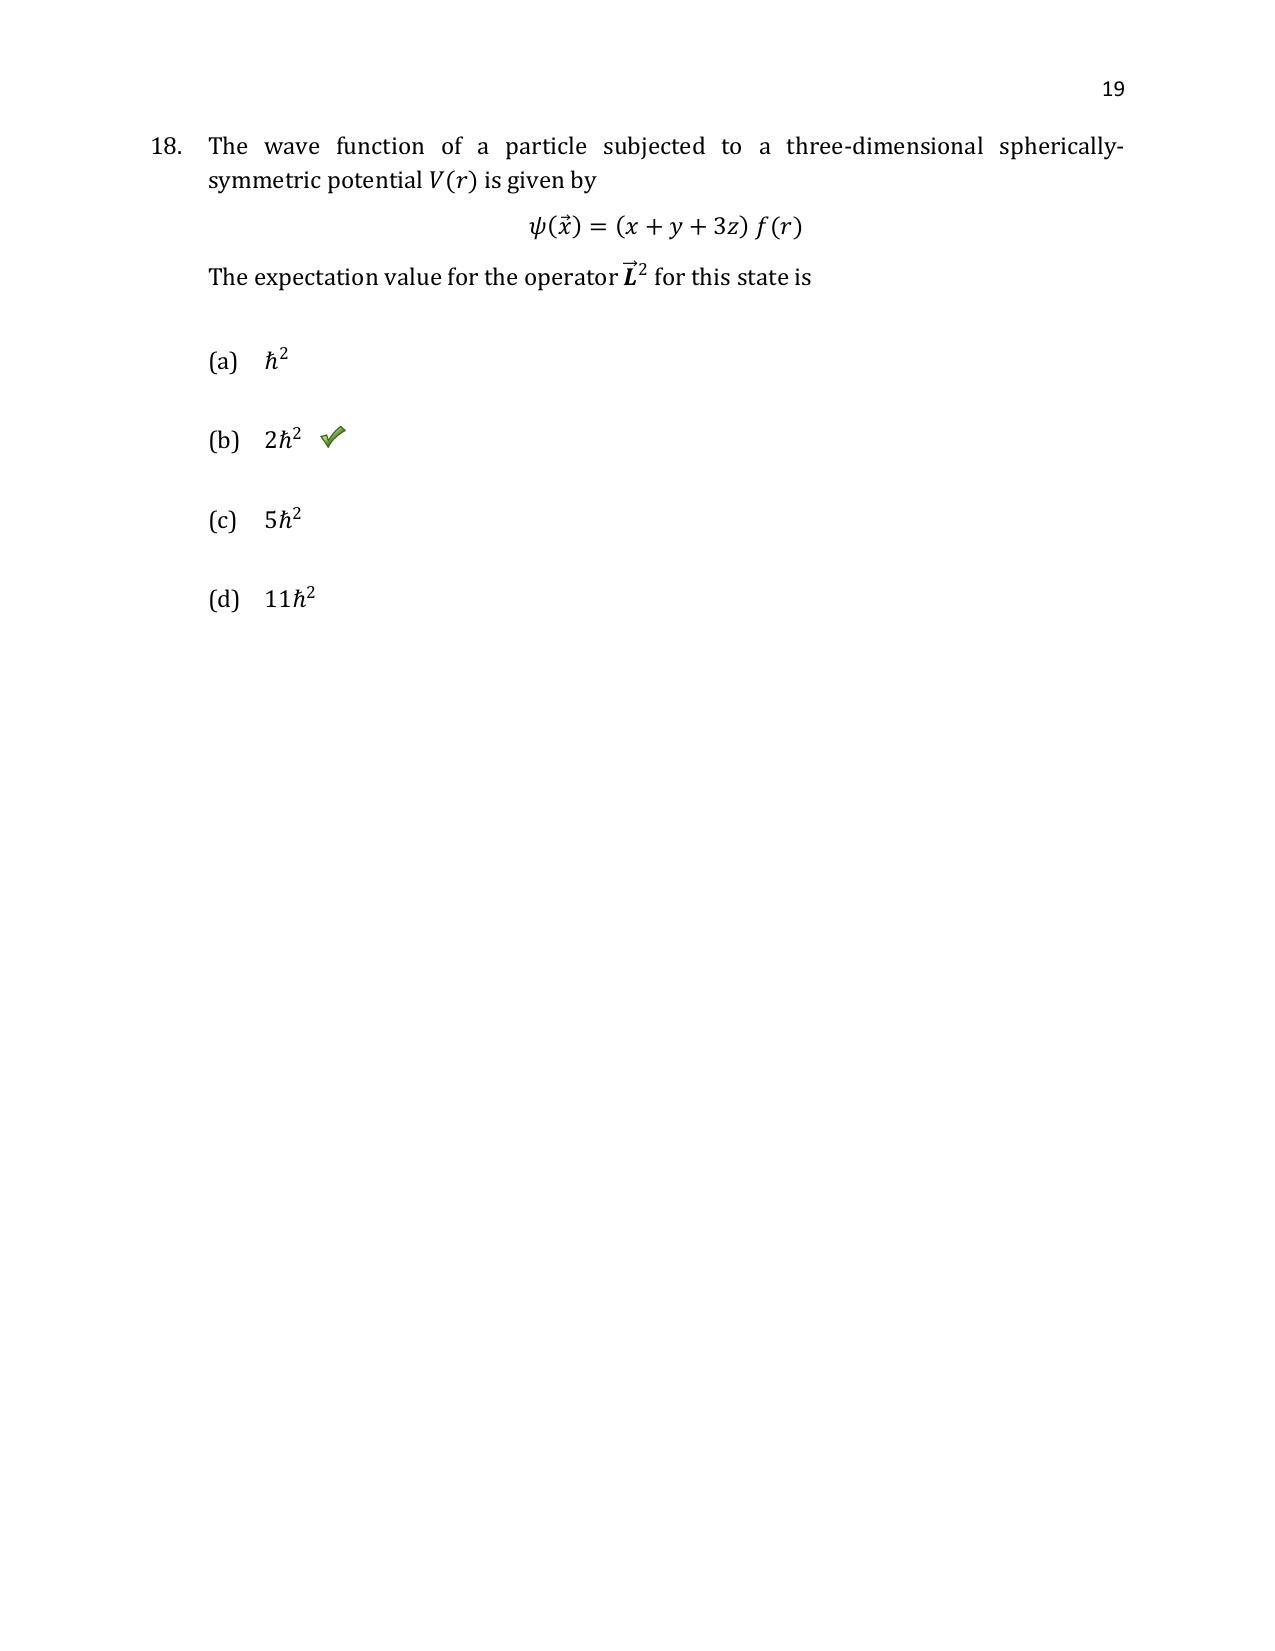 TIFR GS 2020 Physics Question Paper - Page 20